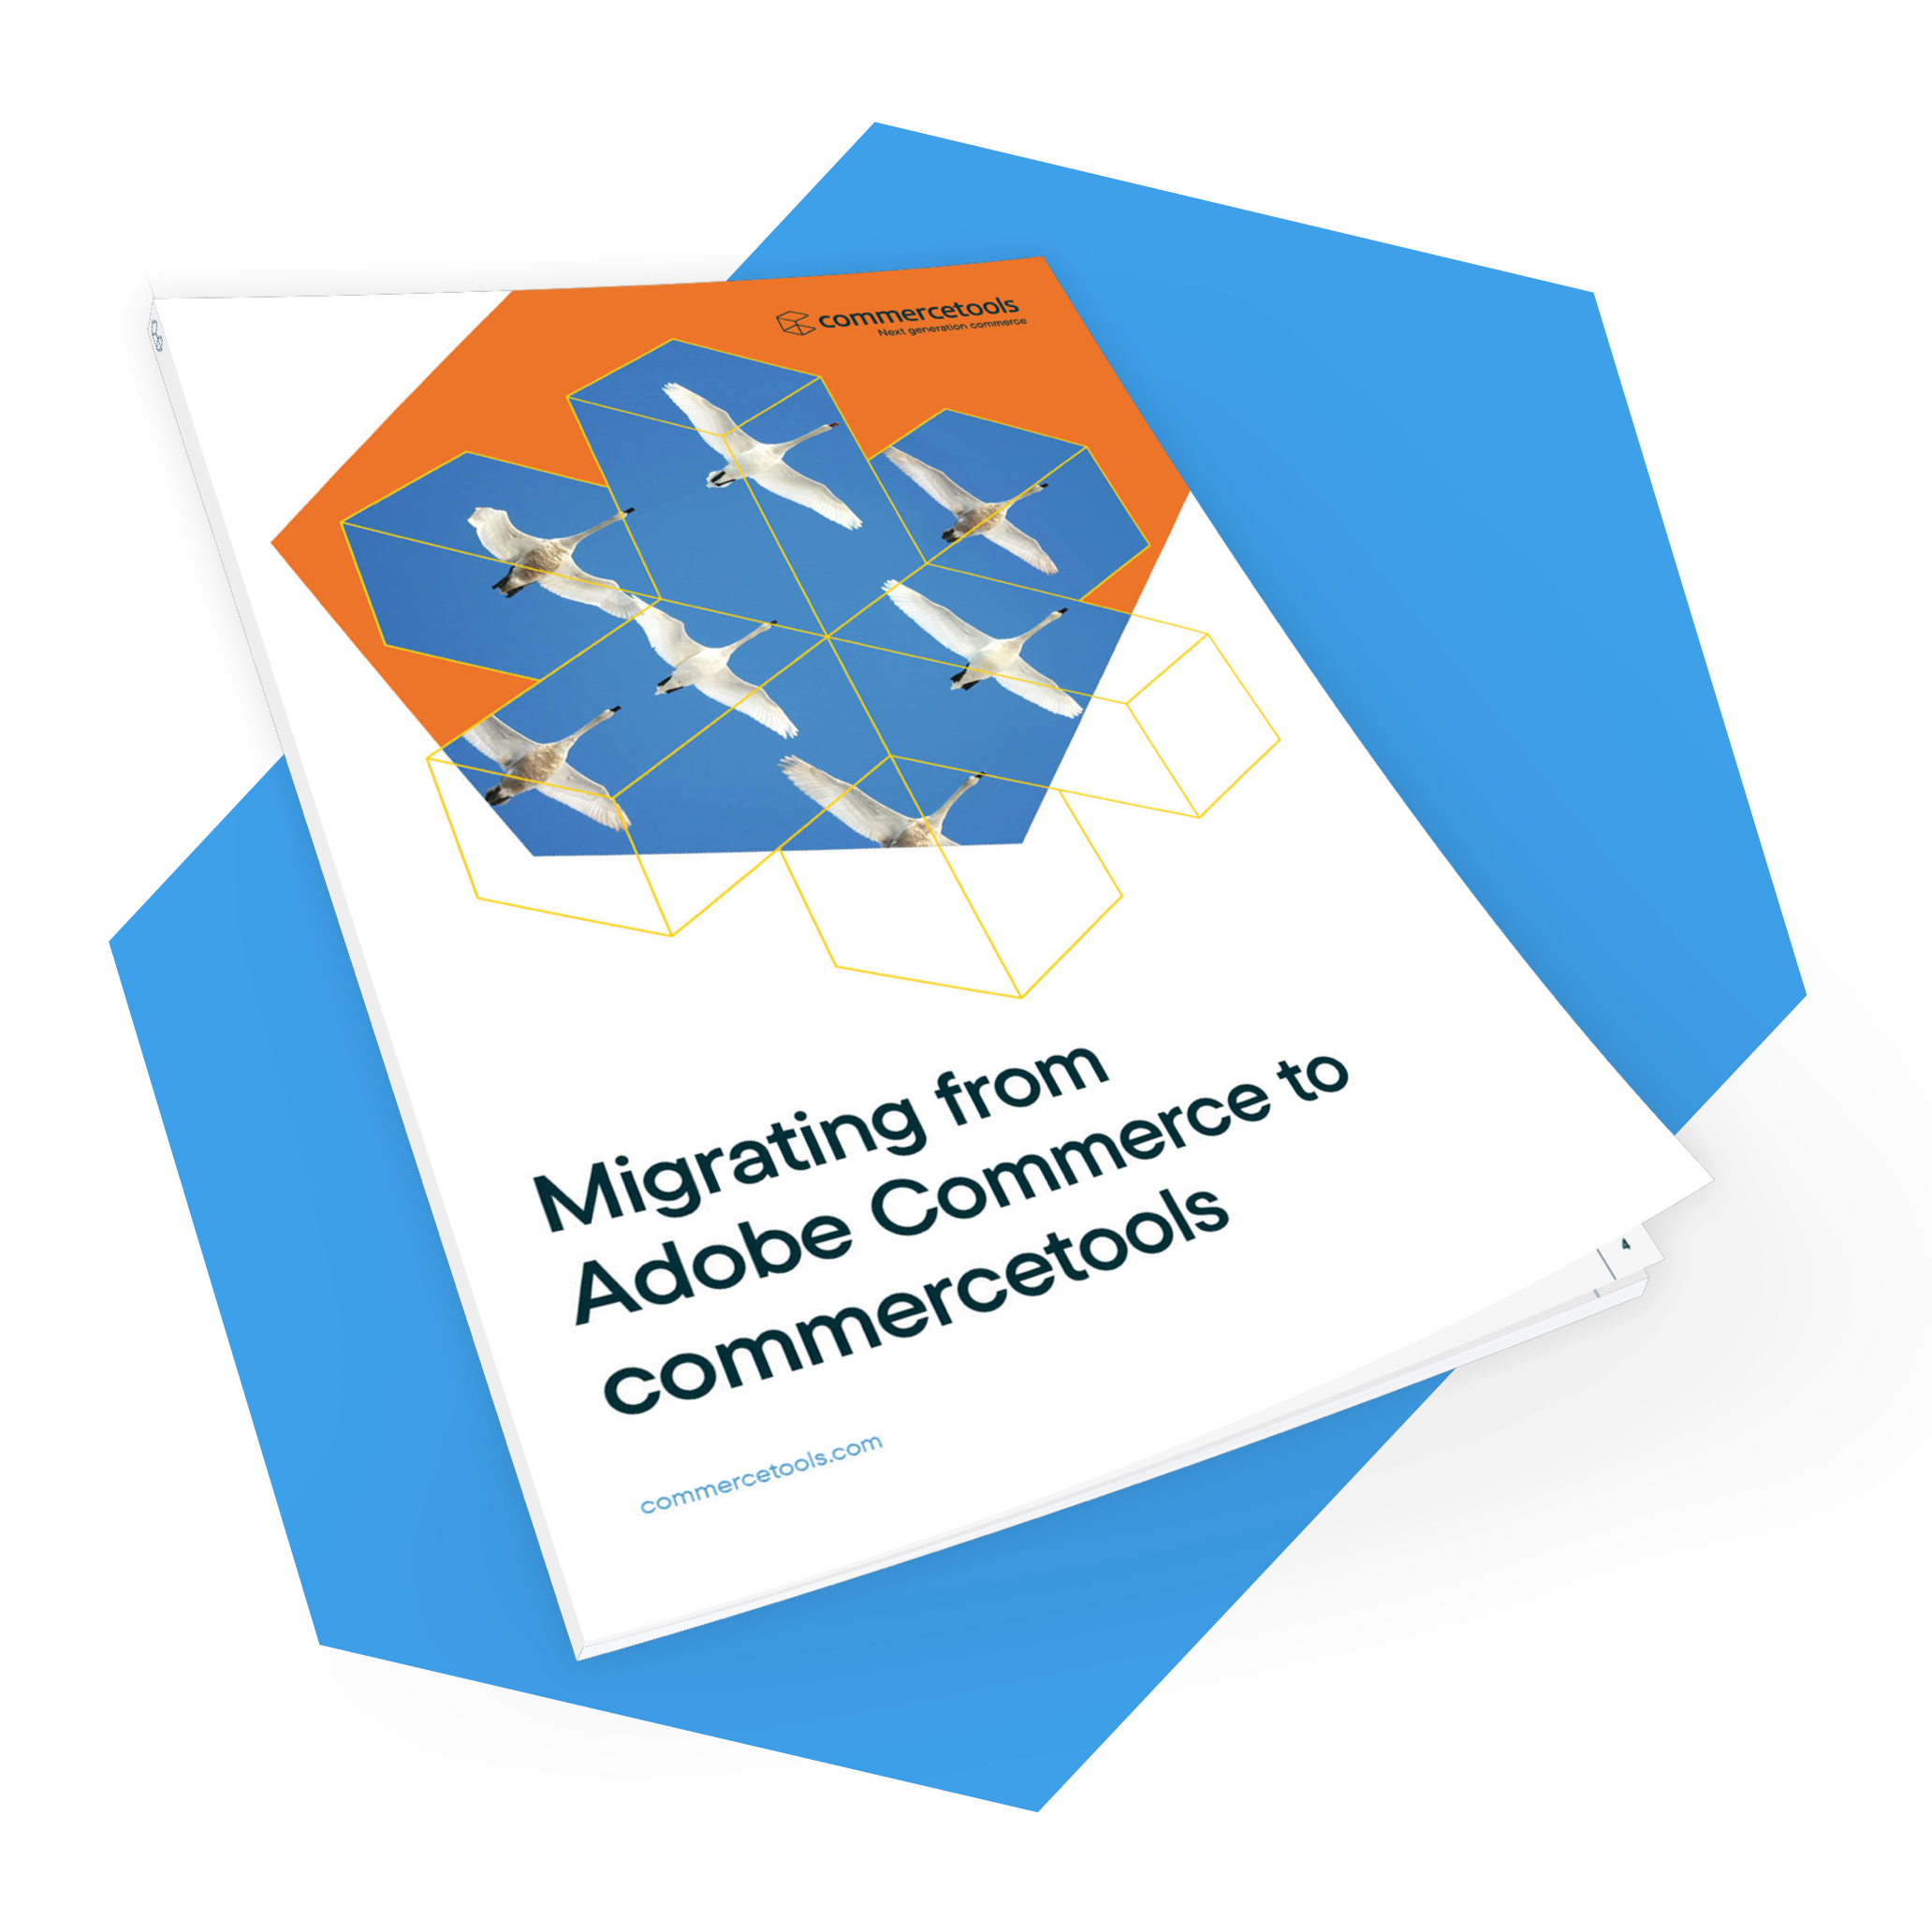 Migrating from Adobe Commerce to commercetools White Paper